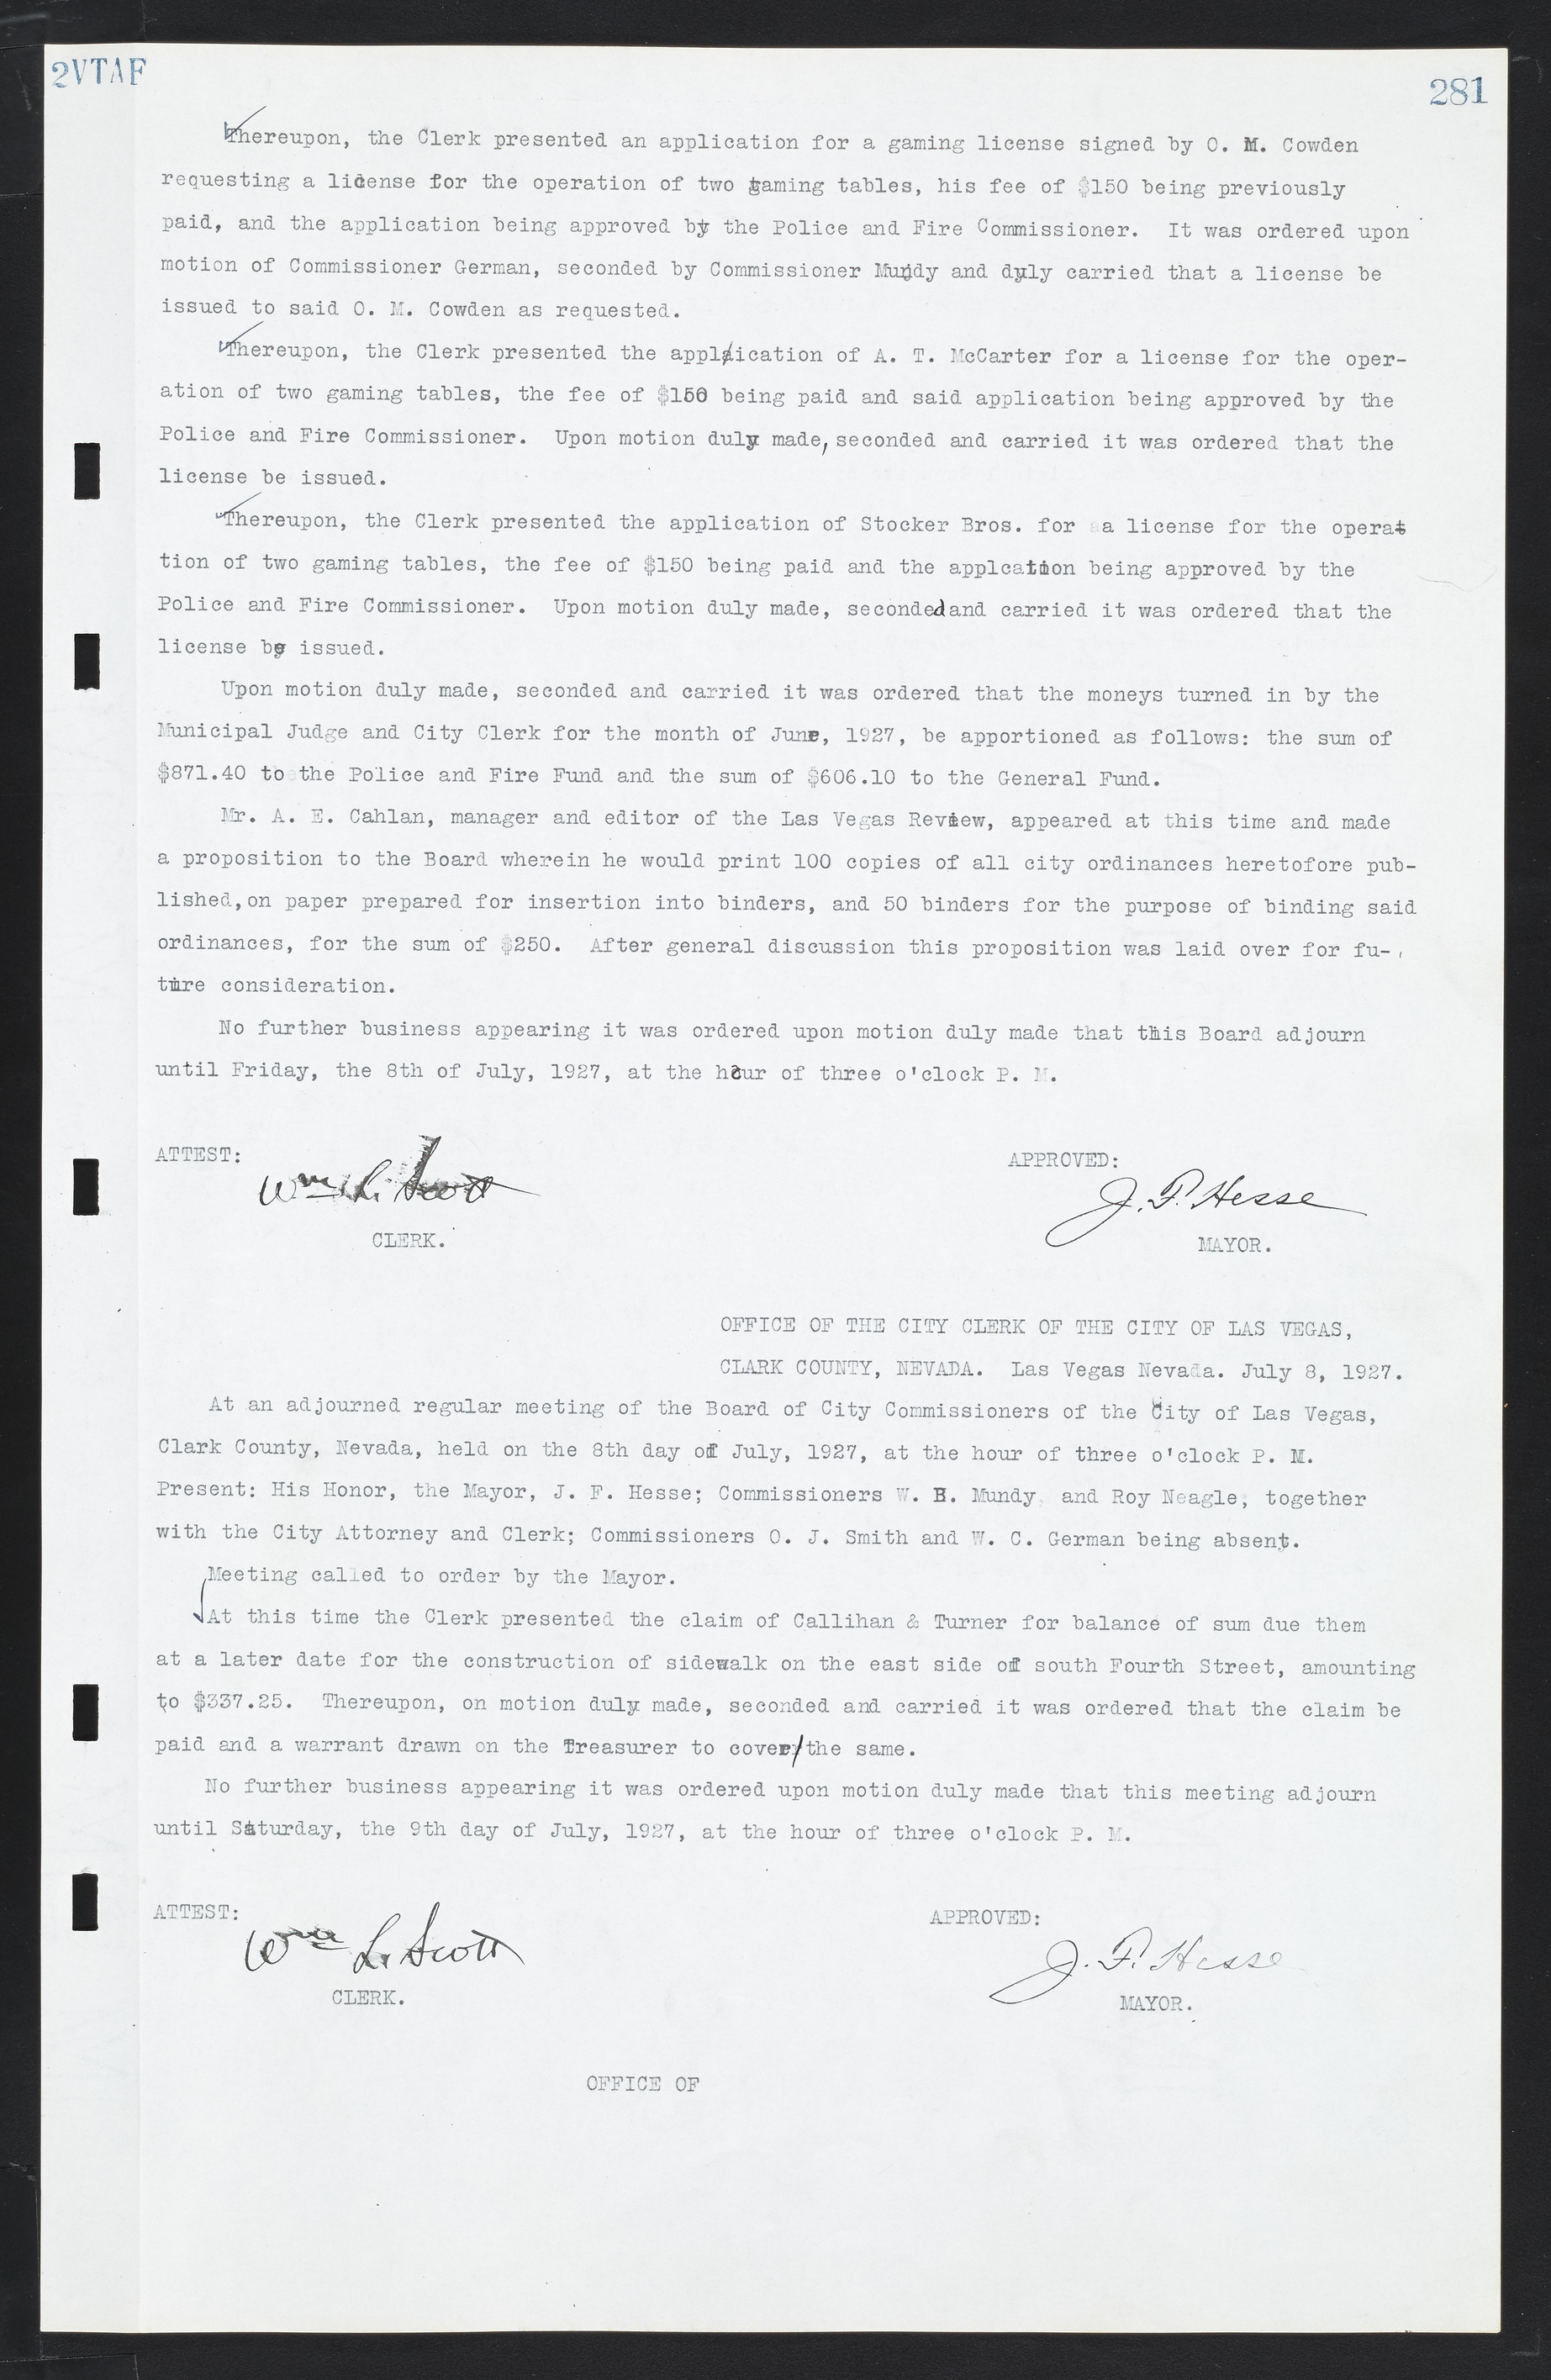 Las Vegas City Commission Minutes, March 1, 1922 to May 10, 1929, lvc000002-290